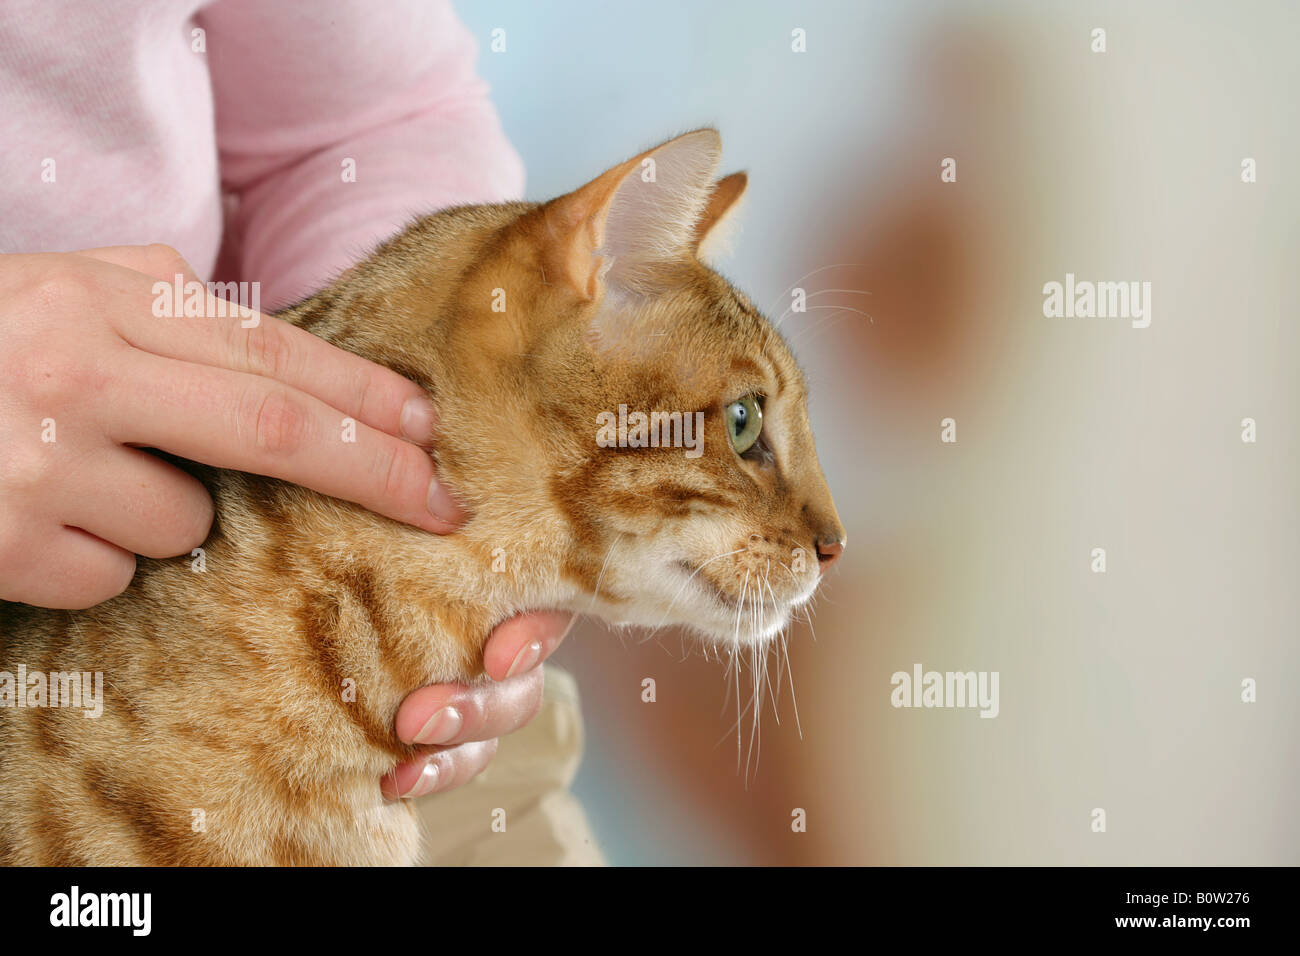 Bengal cat gets examined Stock Photo